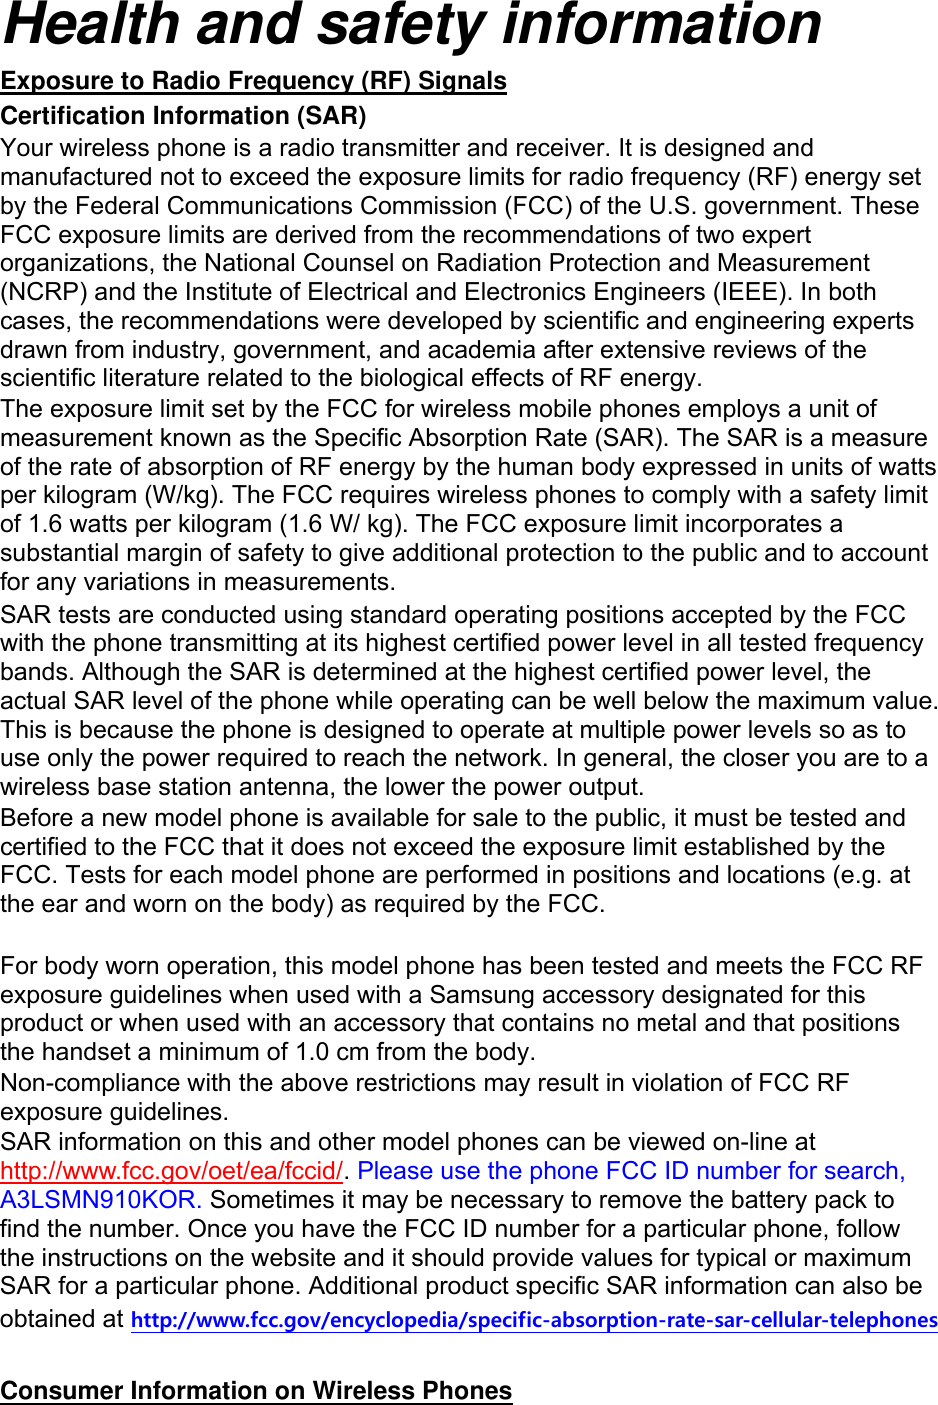 Health and safety information Exposure to Radio Frequency (RF) Signals Certification Information (SAR) Your wireless phone is a radio transmitter and receiver. It is designed and manufactured not to exceed the exposure limits for radio frequency (RF) energy set by the Federal Communications Commission (FCC) of the U.S. government. These FCC exposure limits are derived from the recommendations of two expert organizations, the National Counsel on Radiation Protection and Measurement (NCRP) and the Institute of Electrical and Electronics Engineers (IEEE). In both cases, the recommendations were developed by scientific and engineering experts drawn from industry, government, and academia after extensive reviews of the scientific literature related to the biological effects of RF energy. The exposure limit set by the FCC for wireless mobile phones employs a unit of measurement known as the Specific Absorption Rate (SAR). The SAR is a measure of the rate of absorption of RF energy by the human body expressed in units of watts per kilogram (W/kg). The FCC requires wireless phones to comply with a safety limit of 1.6 watts per kilogram (1.6 W/ kg). The FCC exposure limit incorporates a substantial margin of safety to give additional protection to the public and to account for any variations in measurements. SAR tests are conducted using standard operating positions accepted by the FCC with the phone transmitting at its highest certified power level in all tested frequency bands. Although the SAR is determined at the highest certified power level, the actual SAR level of the phone while operating can be well below the maximum value. This is because the phone is designed to operate at multiple power levels so as to use only the power required to reach the network. In general, the closer you are to a wireless base station antenna, the lower the power output. Before a new model phone is available for sale to the public, it must be tested and certified to the FCC that it does not exceed the exposure limit established by the FCC. Tests for each model phone are performed in positions and locations (e.g. at the ear and worn on the body) as required by the FCC.      For body worn operation, this model phone has been tested and meets the FCC RF exposure guidelines when used with a Samsung accessory designated for this product or when used with an accessory that contains no metal and that positions the handset a minimum of 1.0 cm from the body.   Non-compliance with the above restrictions may result in violation of FCC RF exposure guidelines. SAR information on this and other model phones can be viewed on-line at http://www.fcc.gov/oet/ea/fccid/. Please use the phone FCC ID number for search, A3LSMN910KOR. Sometimes it may be necessary to remove the battery pack to find the number. Once you have the FCC ID number for a particular phone, follow the instructions on the website and it should provide values for typical or maximum SAR for a particular phone. Additional product specific SAR information can also be obtained at http://www.fcc.gov/encyclopedia/specific-absorption-rate-sar-cellular-telephones  Consumer Information on Wireless Phones 